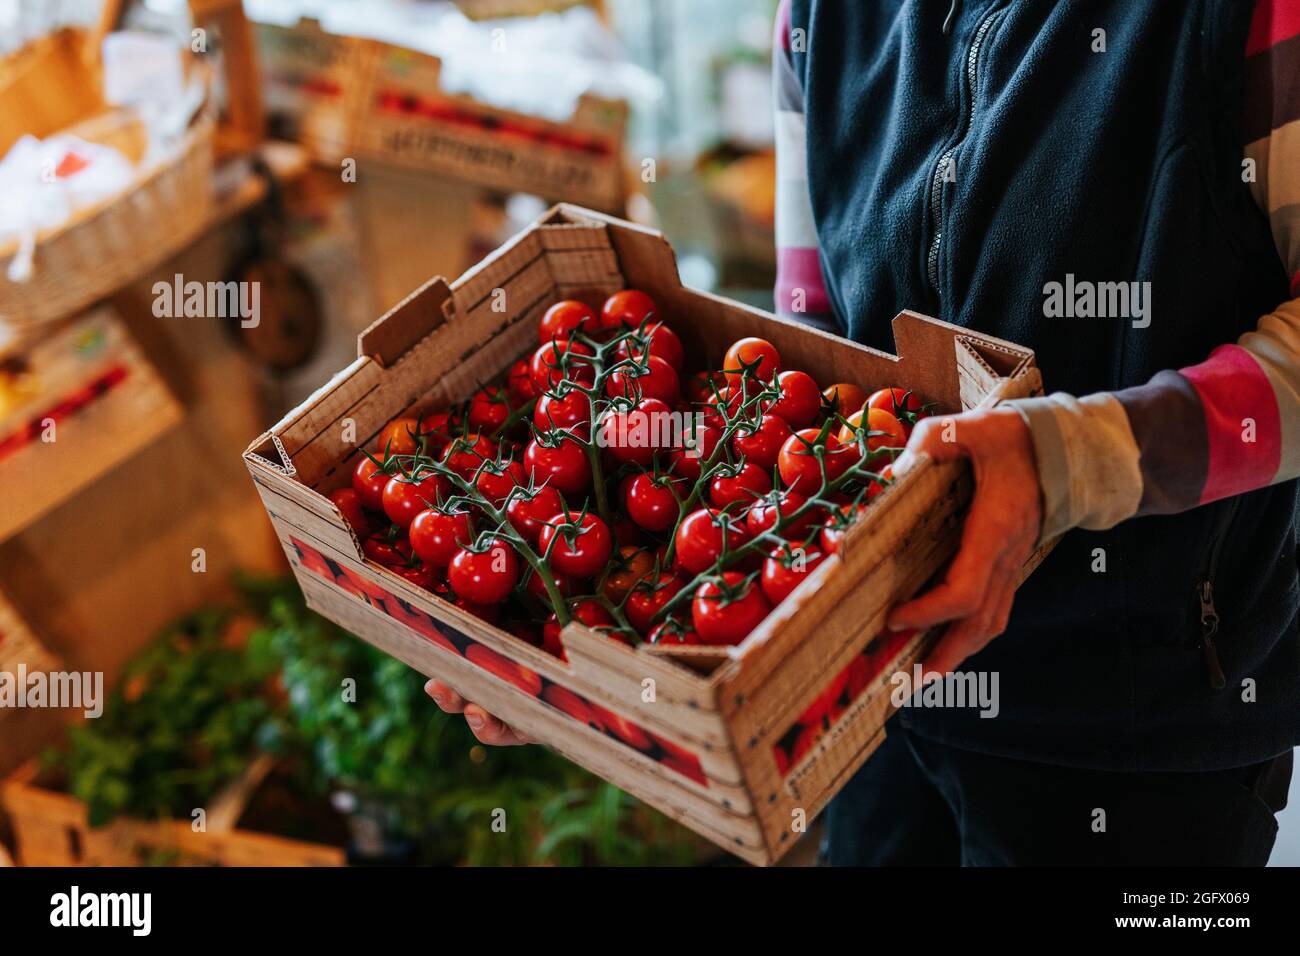 Shop assistant holding crate with tomatoes Stock Photo